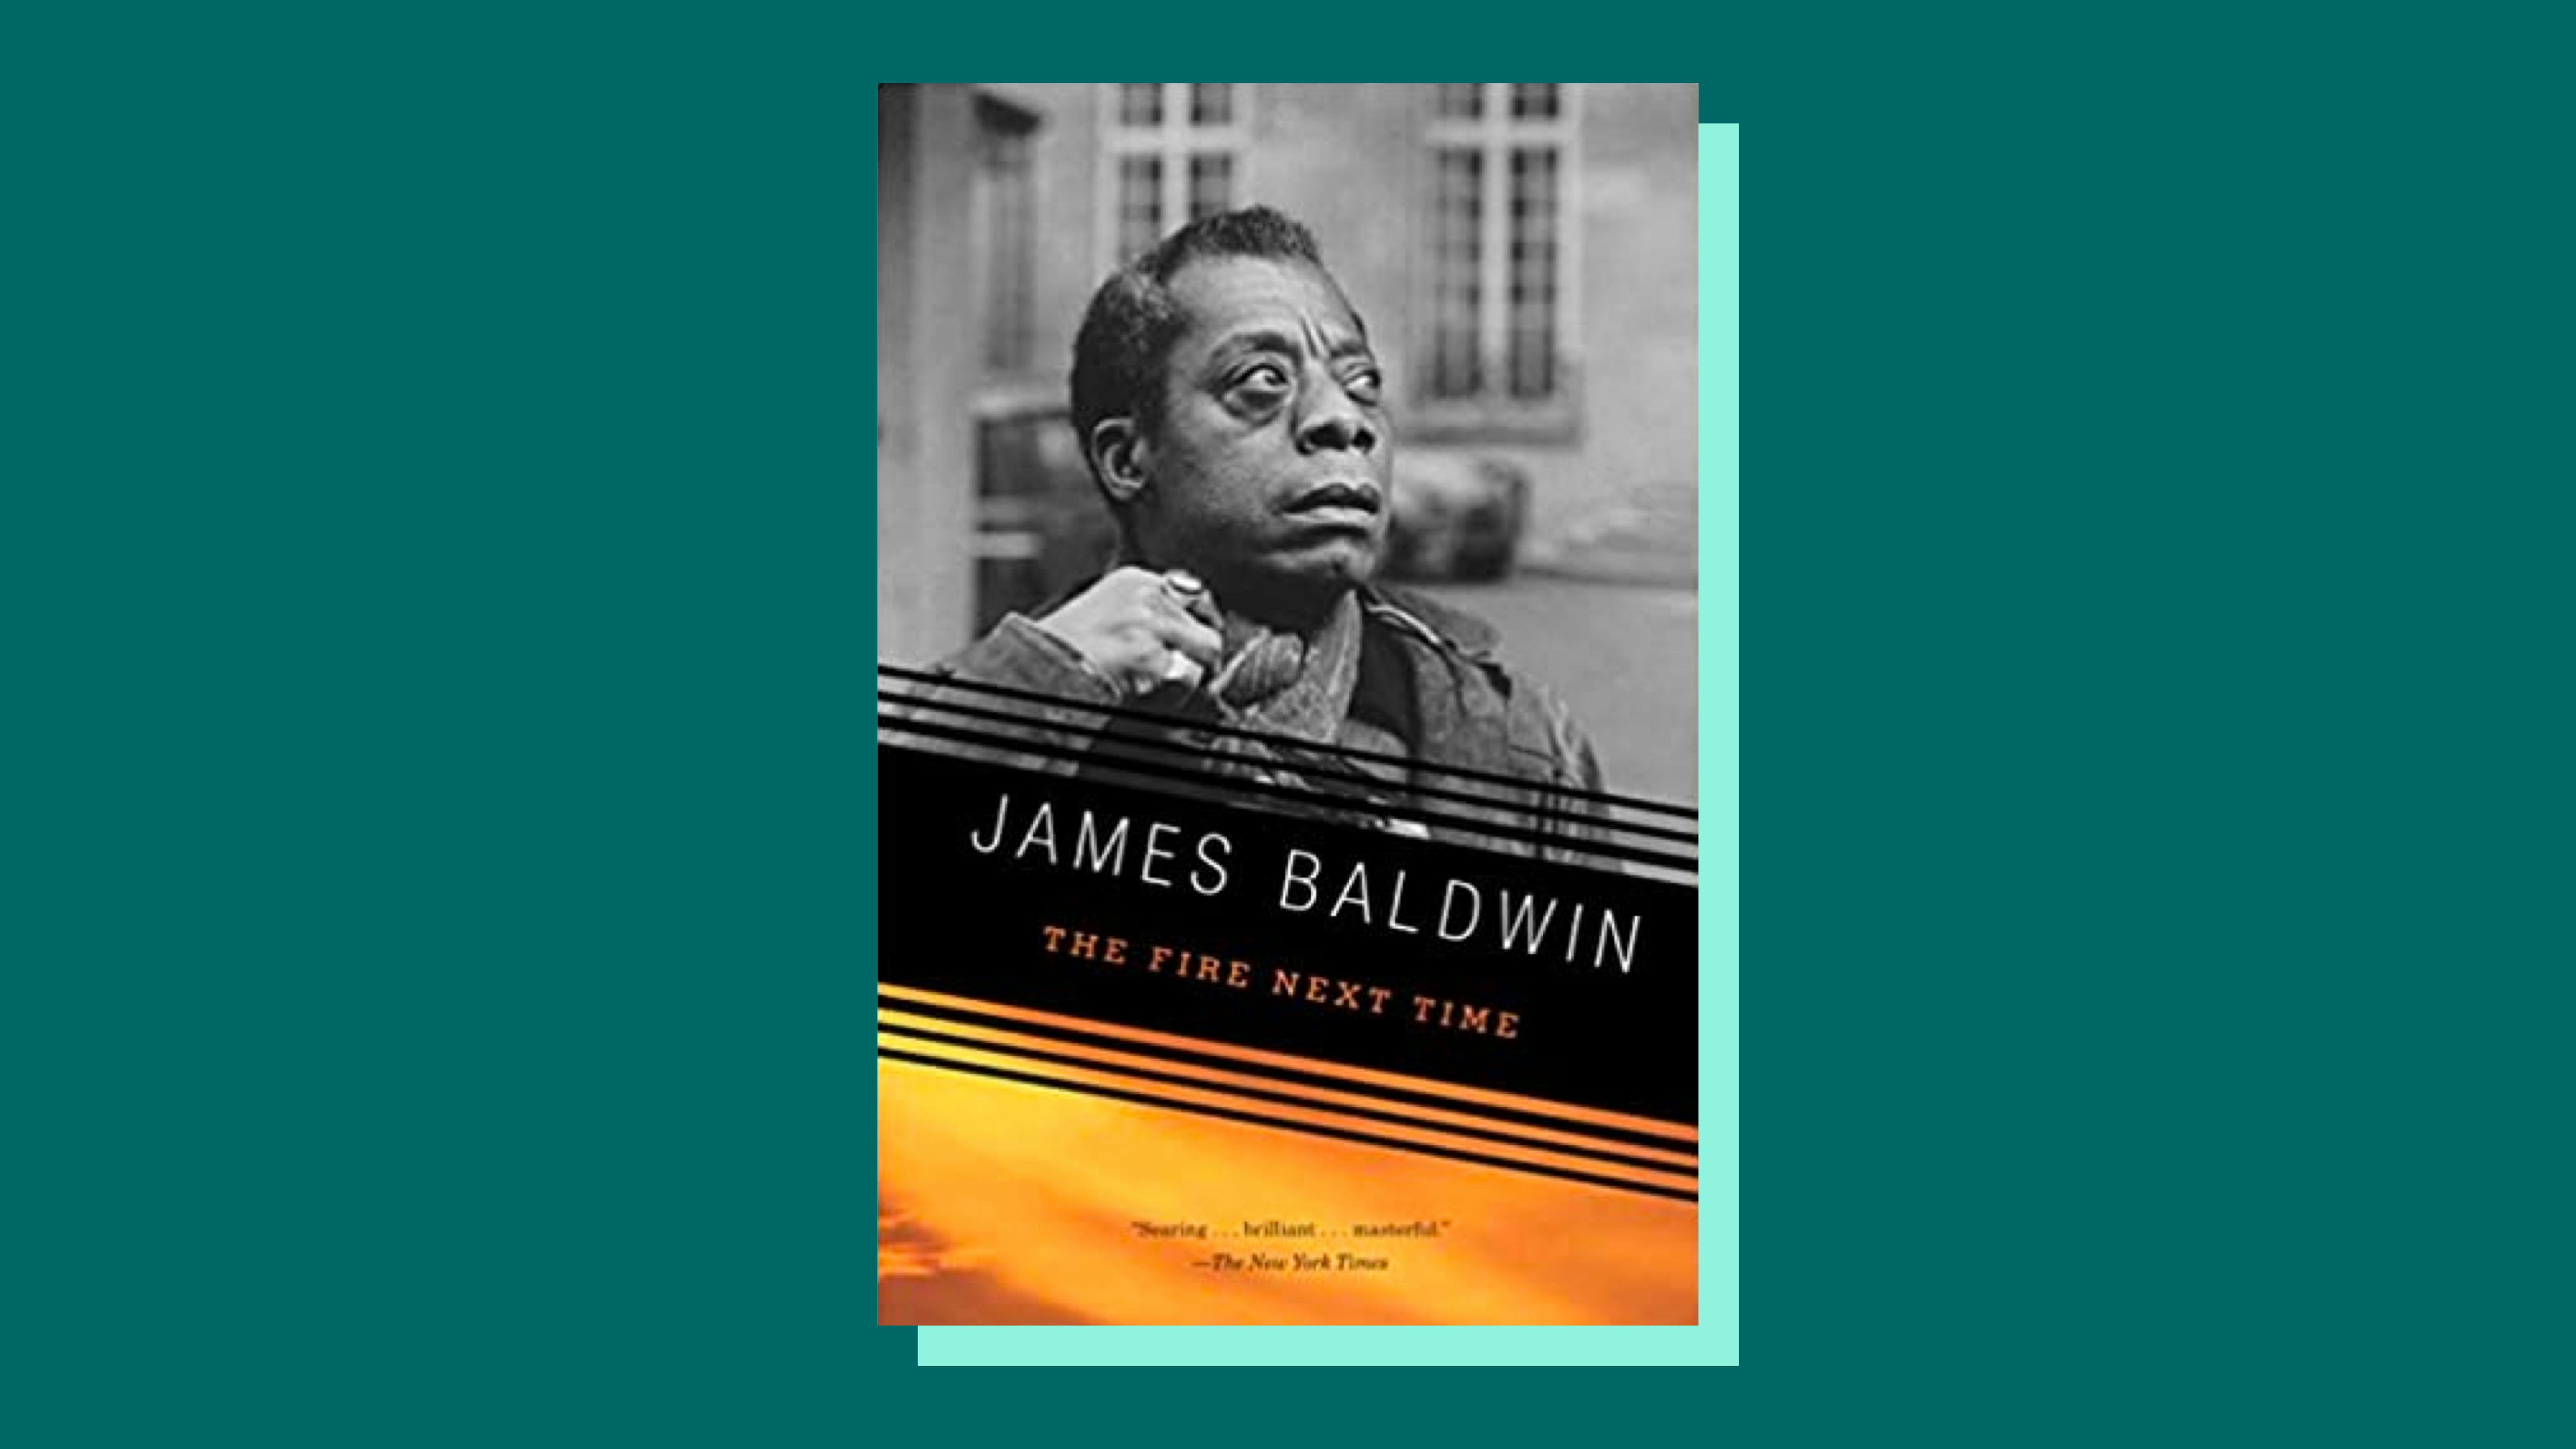 “The Fire Next Time” by James Baldwin 